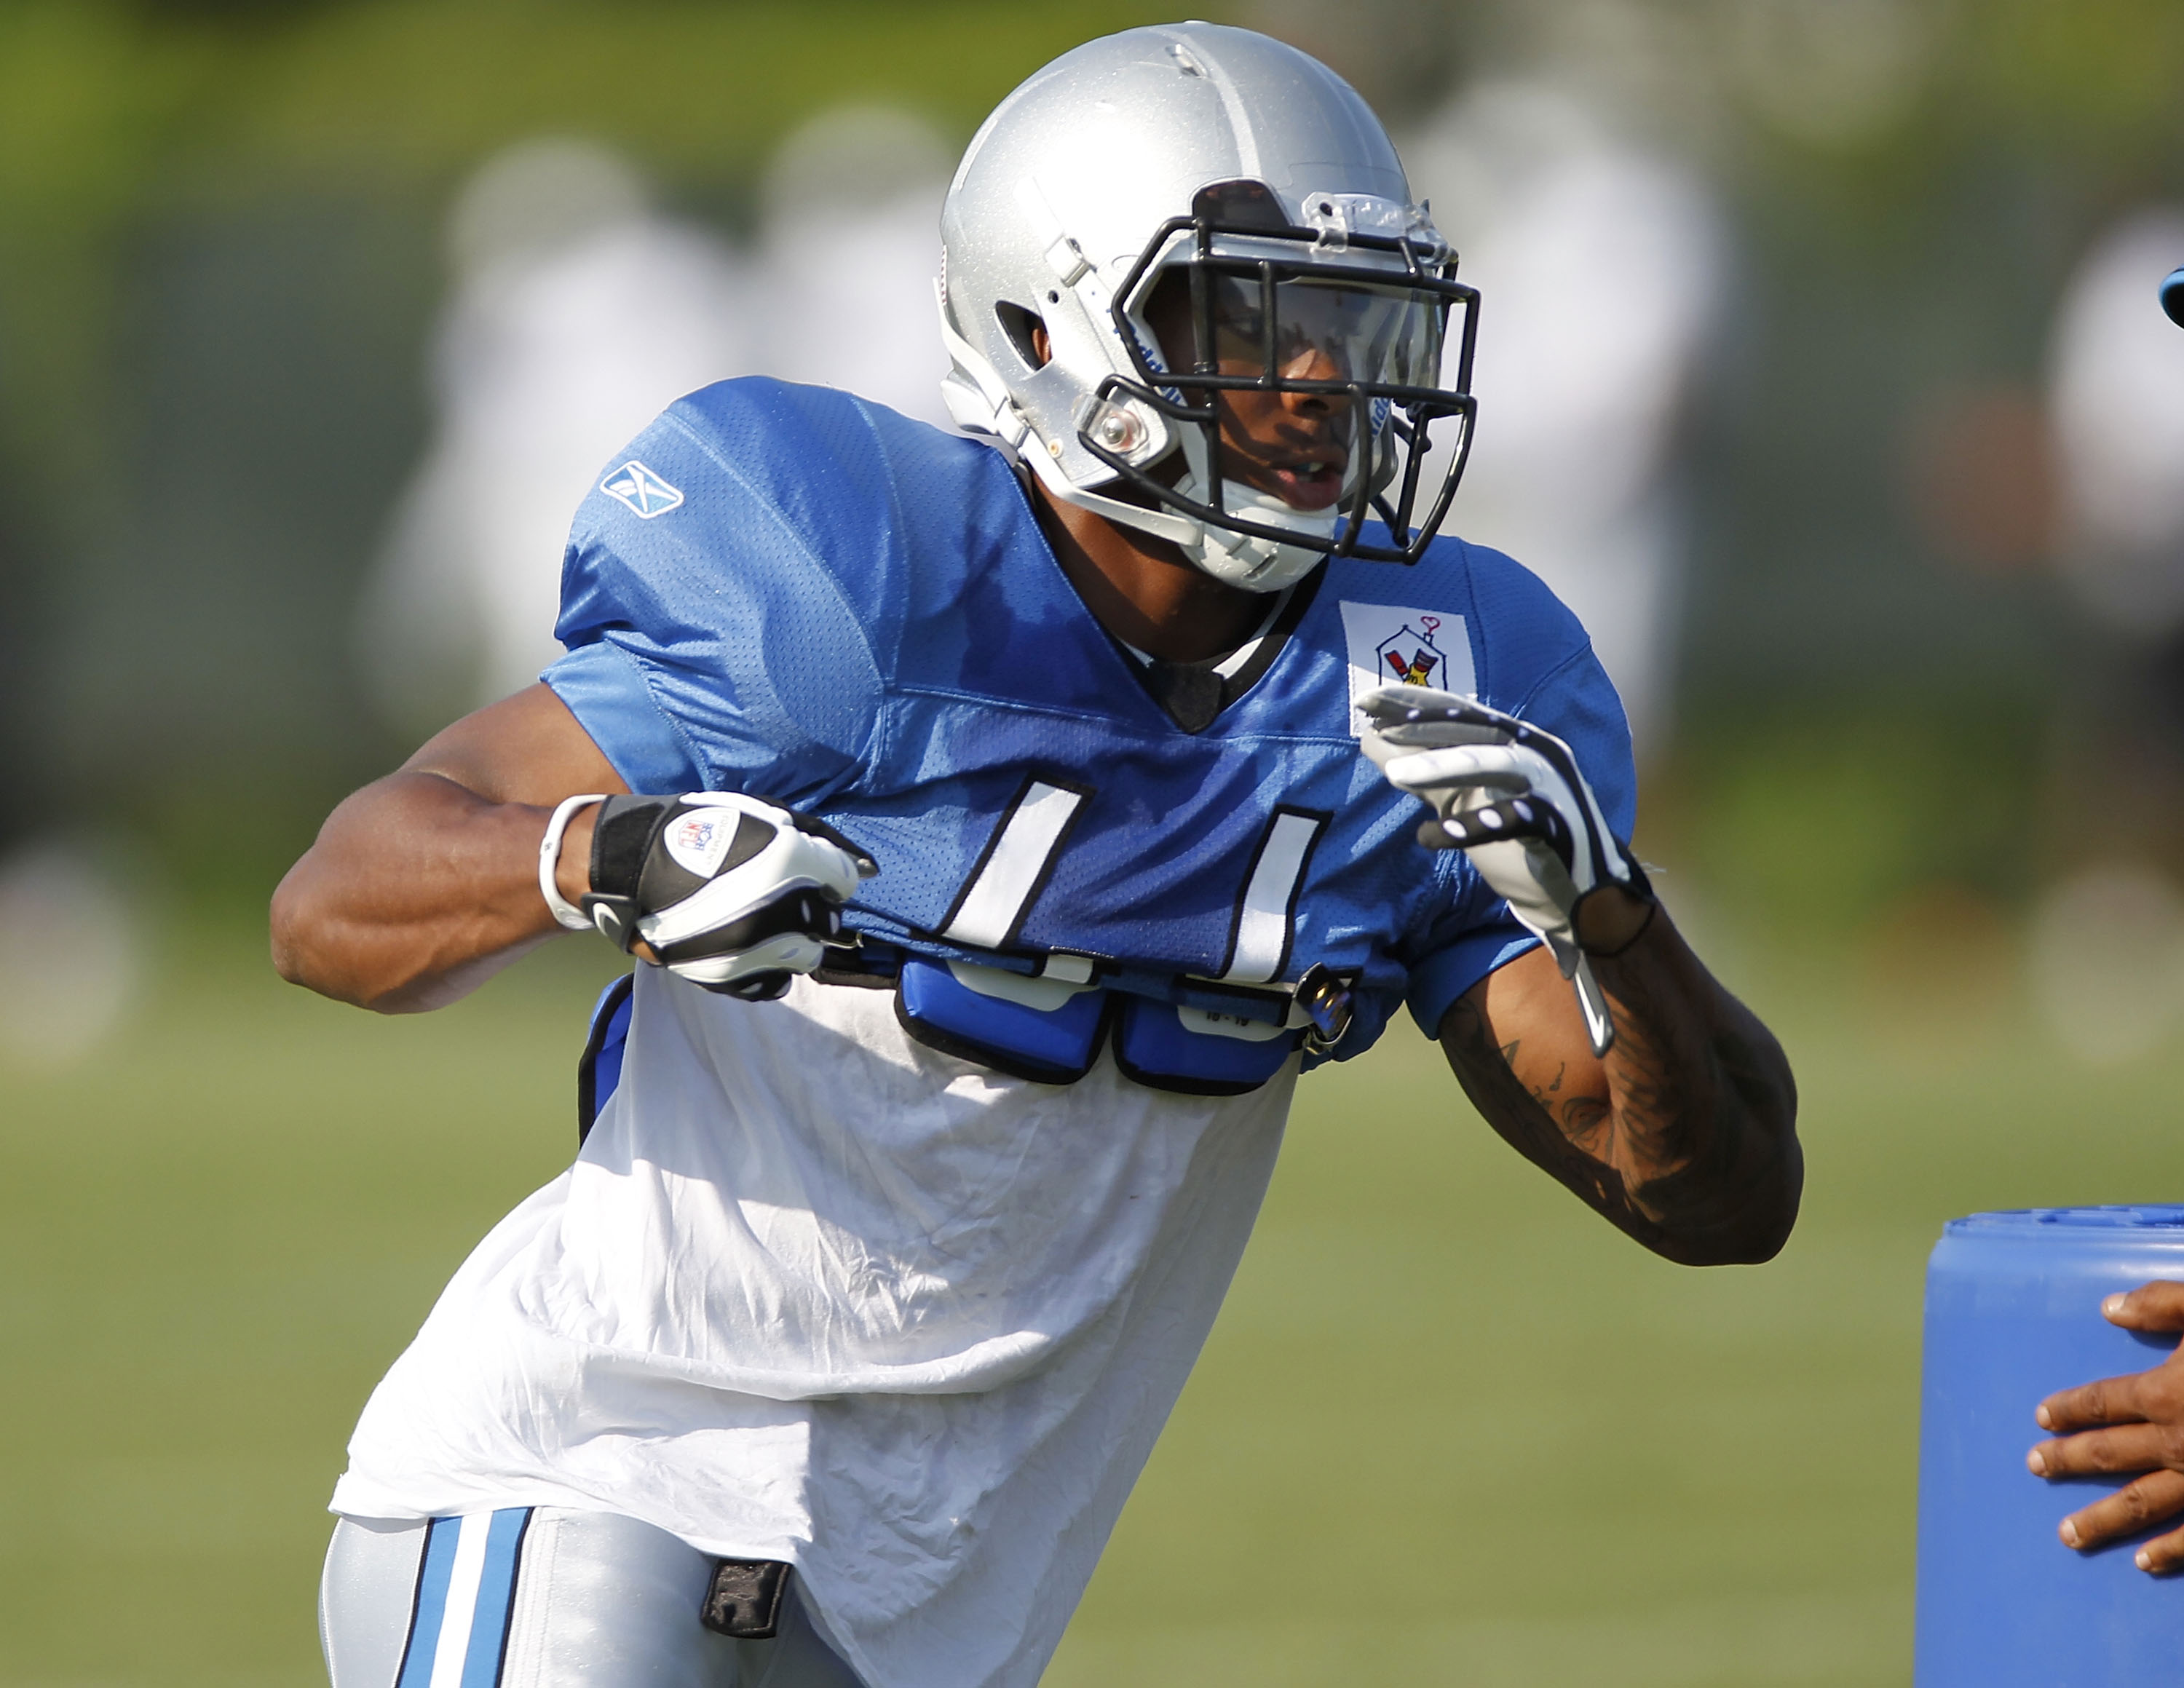 ALLEN PARK, MI - AUGUST 05:  Jahvid Best #44 of the Detroit Lions runs a drill during training camp at the Detroit Lions Headquarters and Training Facility on August 5, 2010 in Allen Park, Michigan.  (Photo by Gregory Shamus/Getty Images)